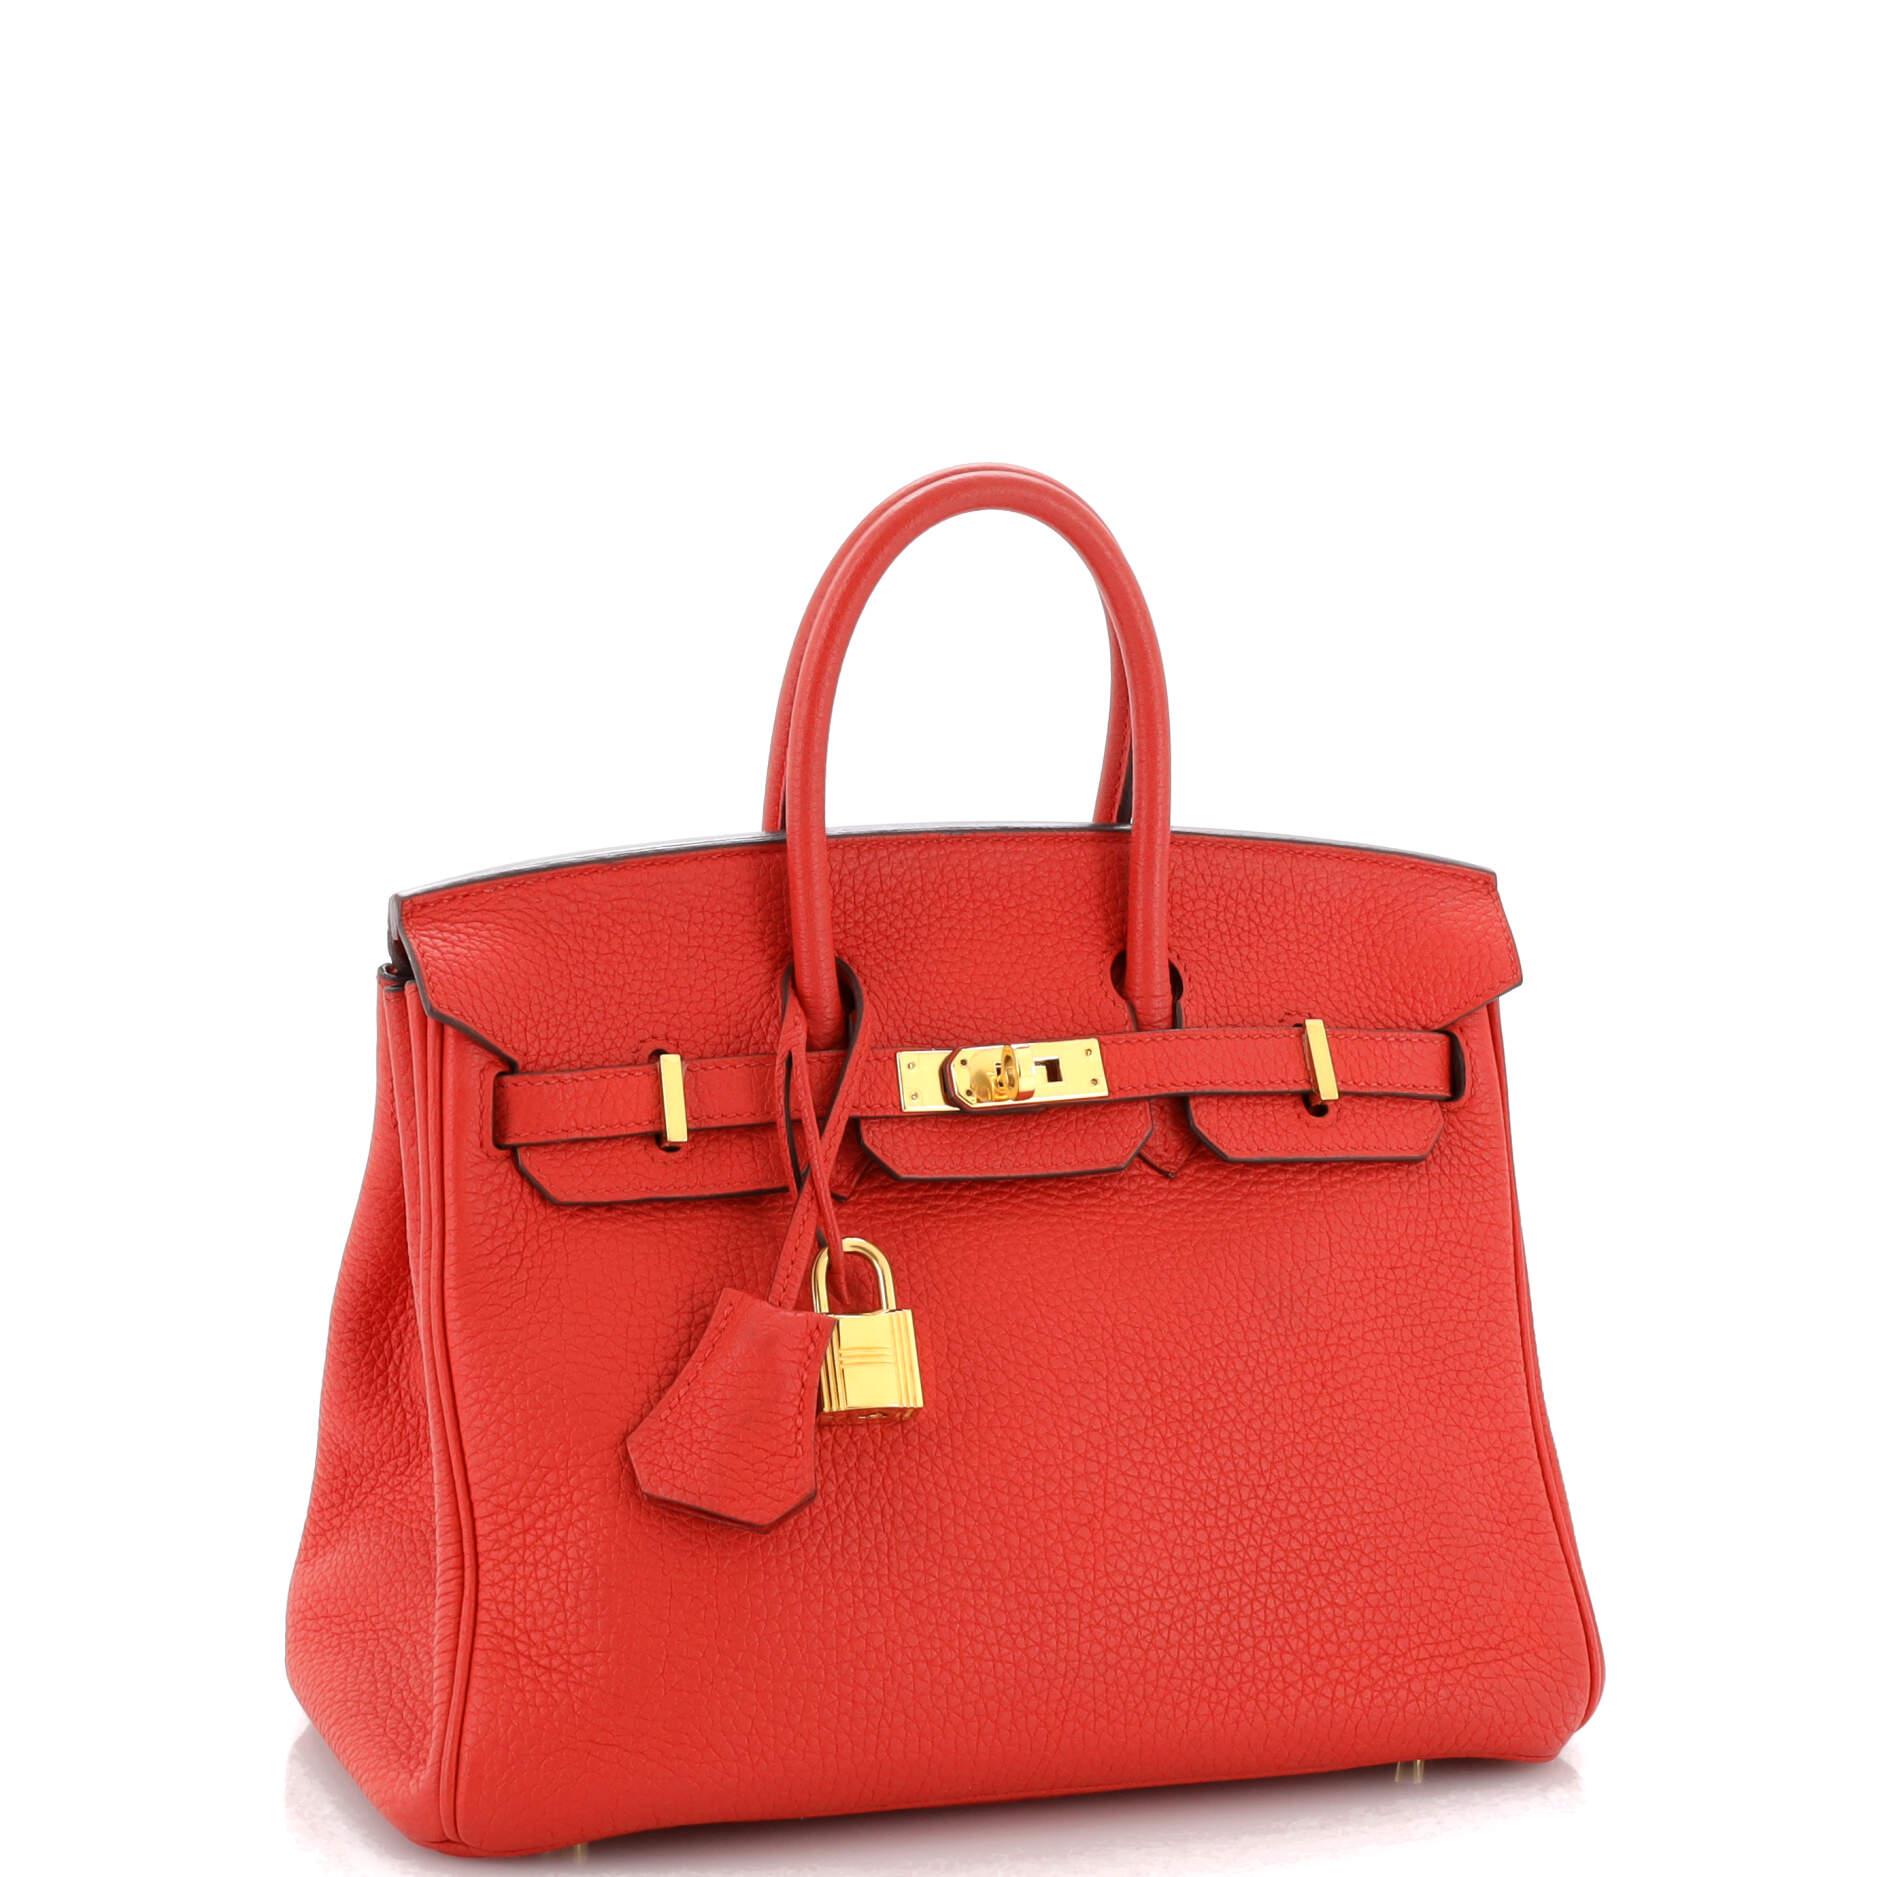 Hermes Birkin Handbag Rouge De Coeur Clemence with Gold Hardware 25 In Fair Condition For Sale In NY, NY